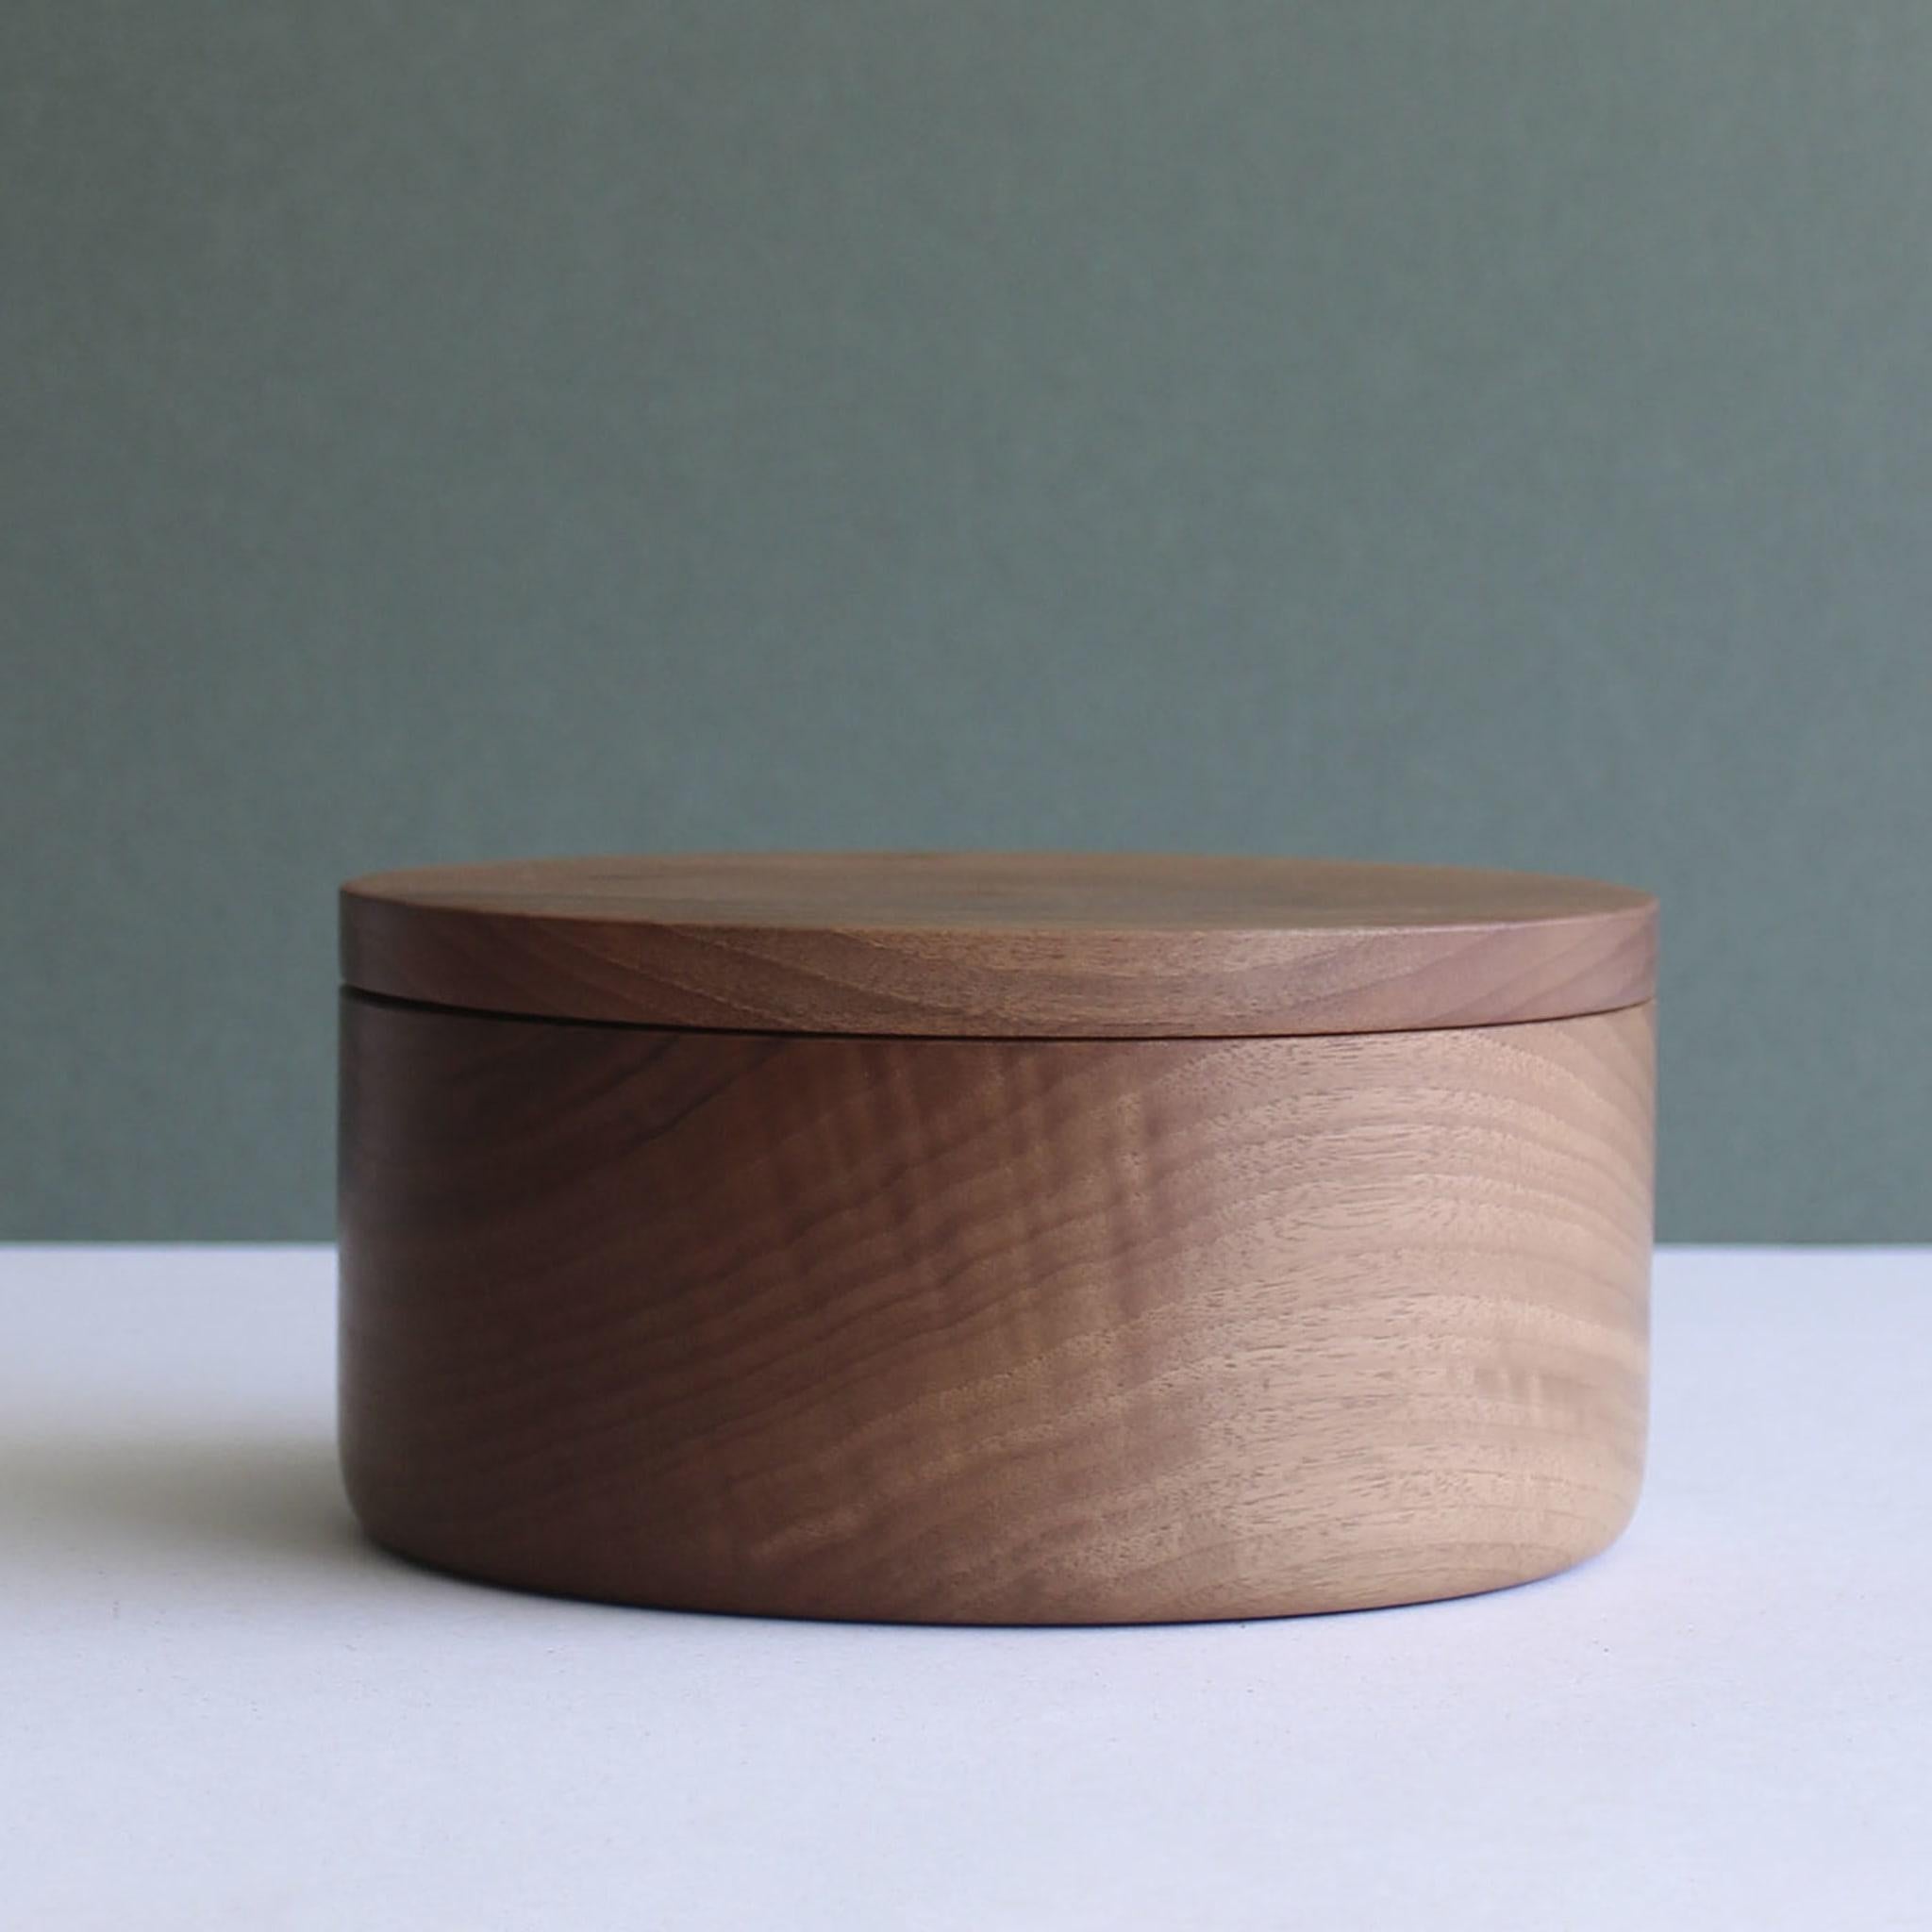 Unadorned charm gets ennobled by the presence of unpredictable natural grain in this precious cylindrical box entirely crafted by hand from solid walnut. Finished with specific food-safe oils, it makes for an elegant and practical addition to modern